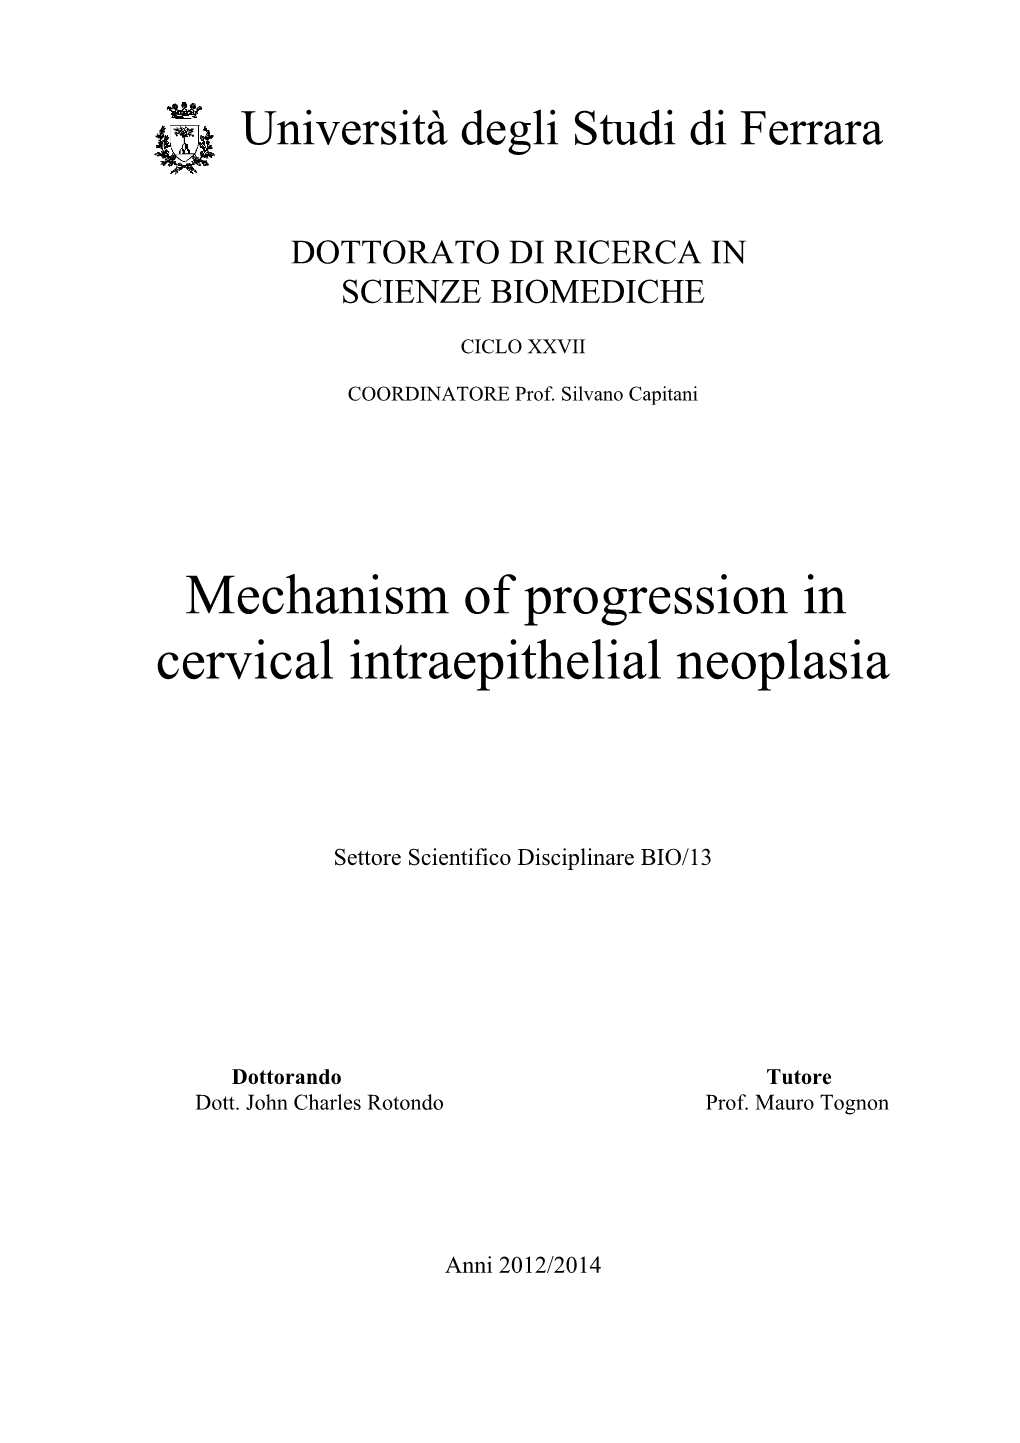 Mechanism of Progression in Cervical Intraepithelial Neoplasia